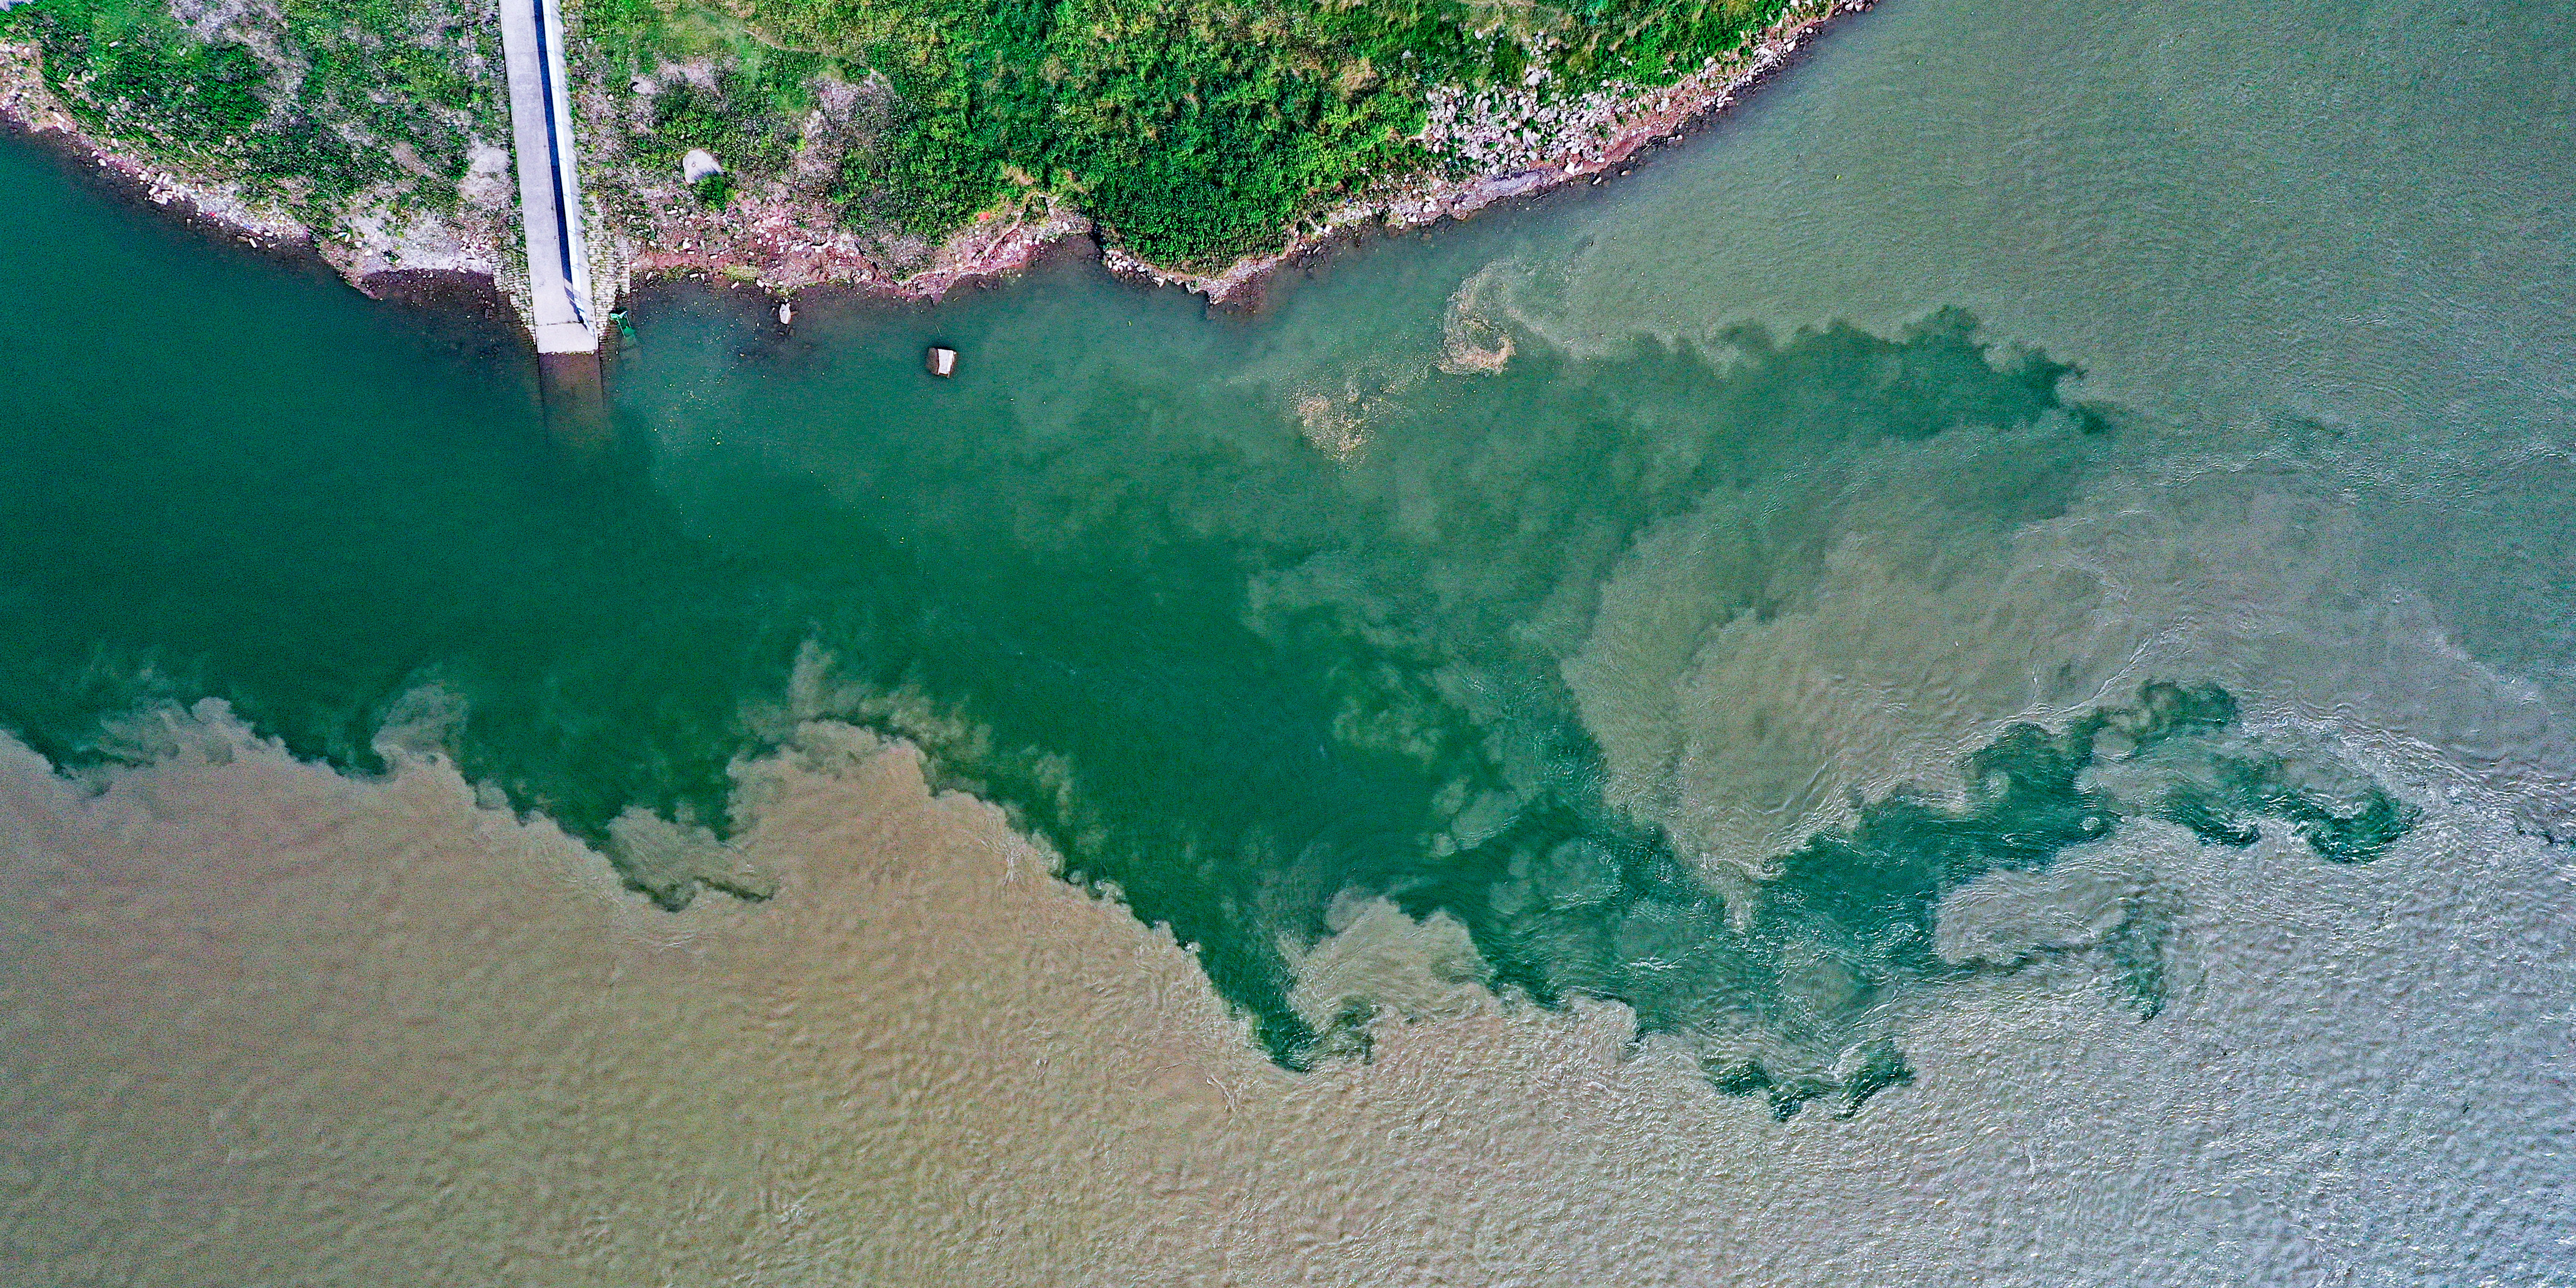 Photo taken on June 6, 2023, shows the phenomenon at the confluence of the Yangtze River and the Tuojiang River. The color differences are mainly due to their difference in debris and vegetation, causing a contrasting scene when the two bodies of water merge into one another to become a single river. /CNSPHOTO